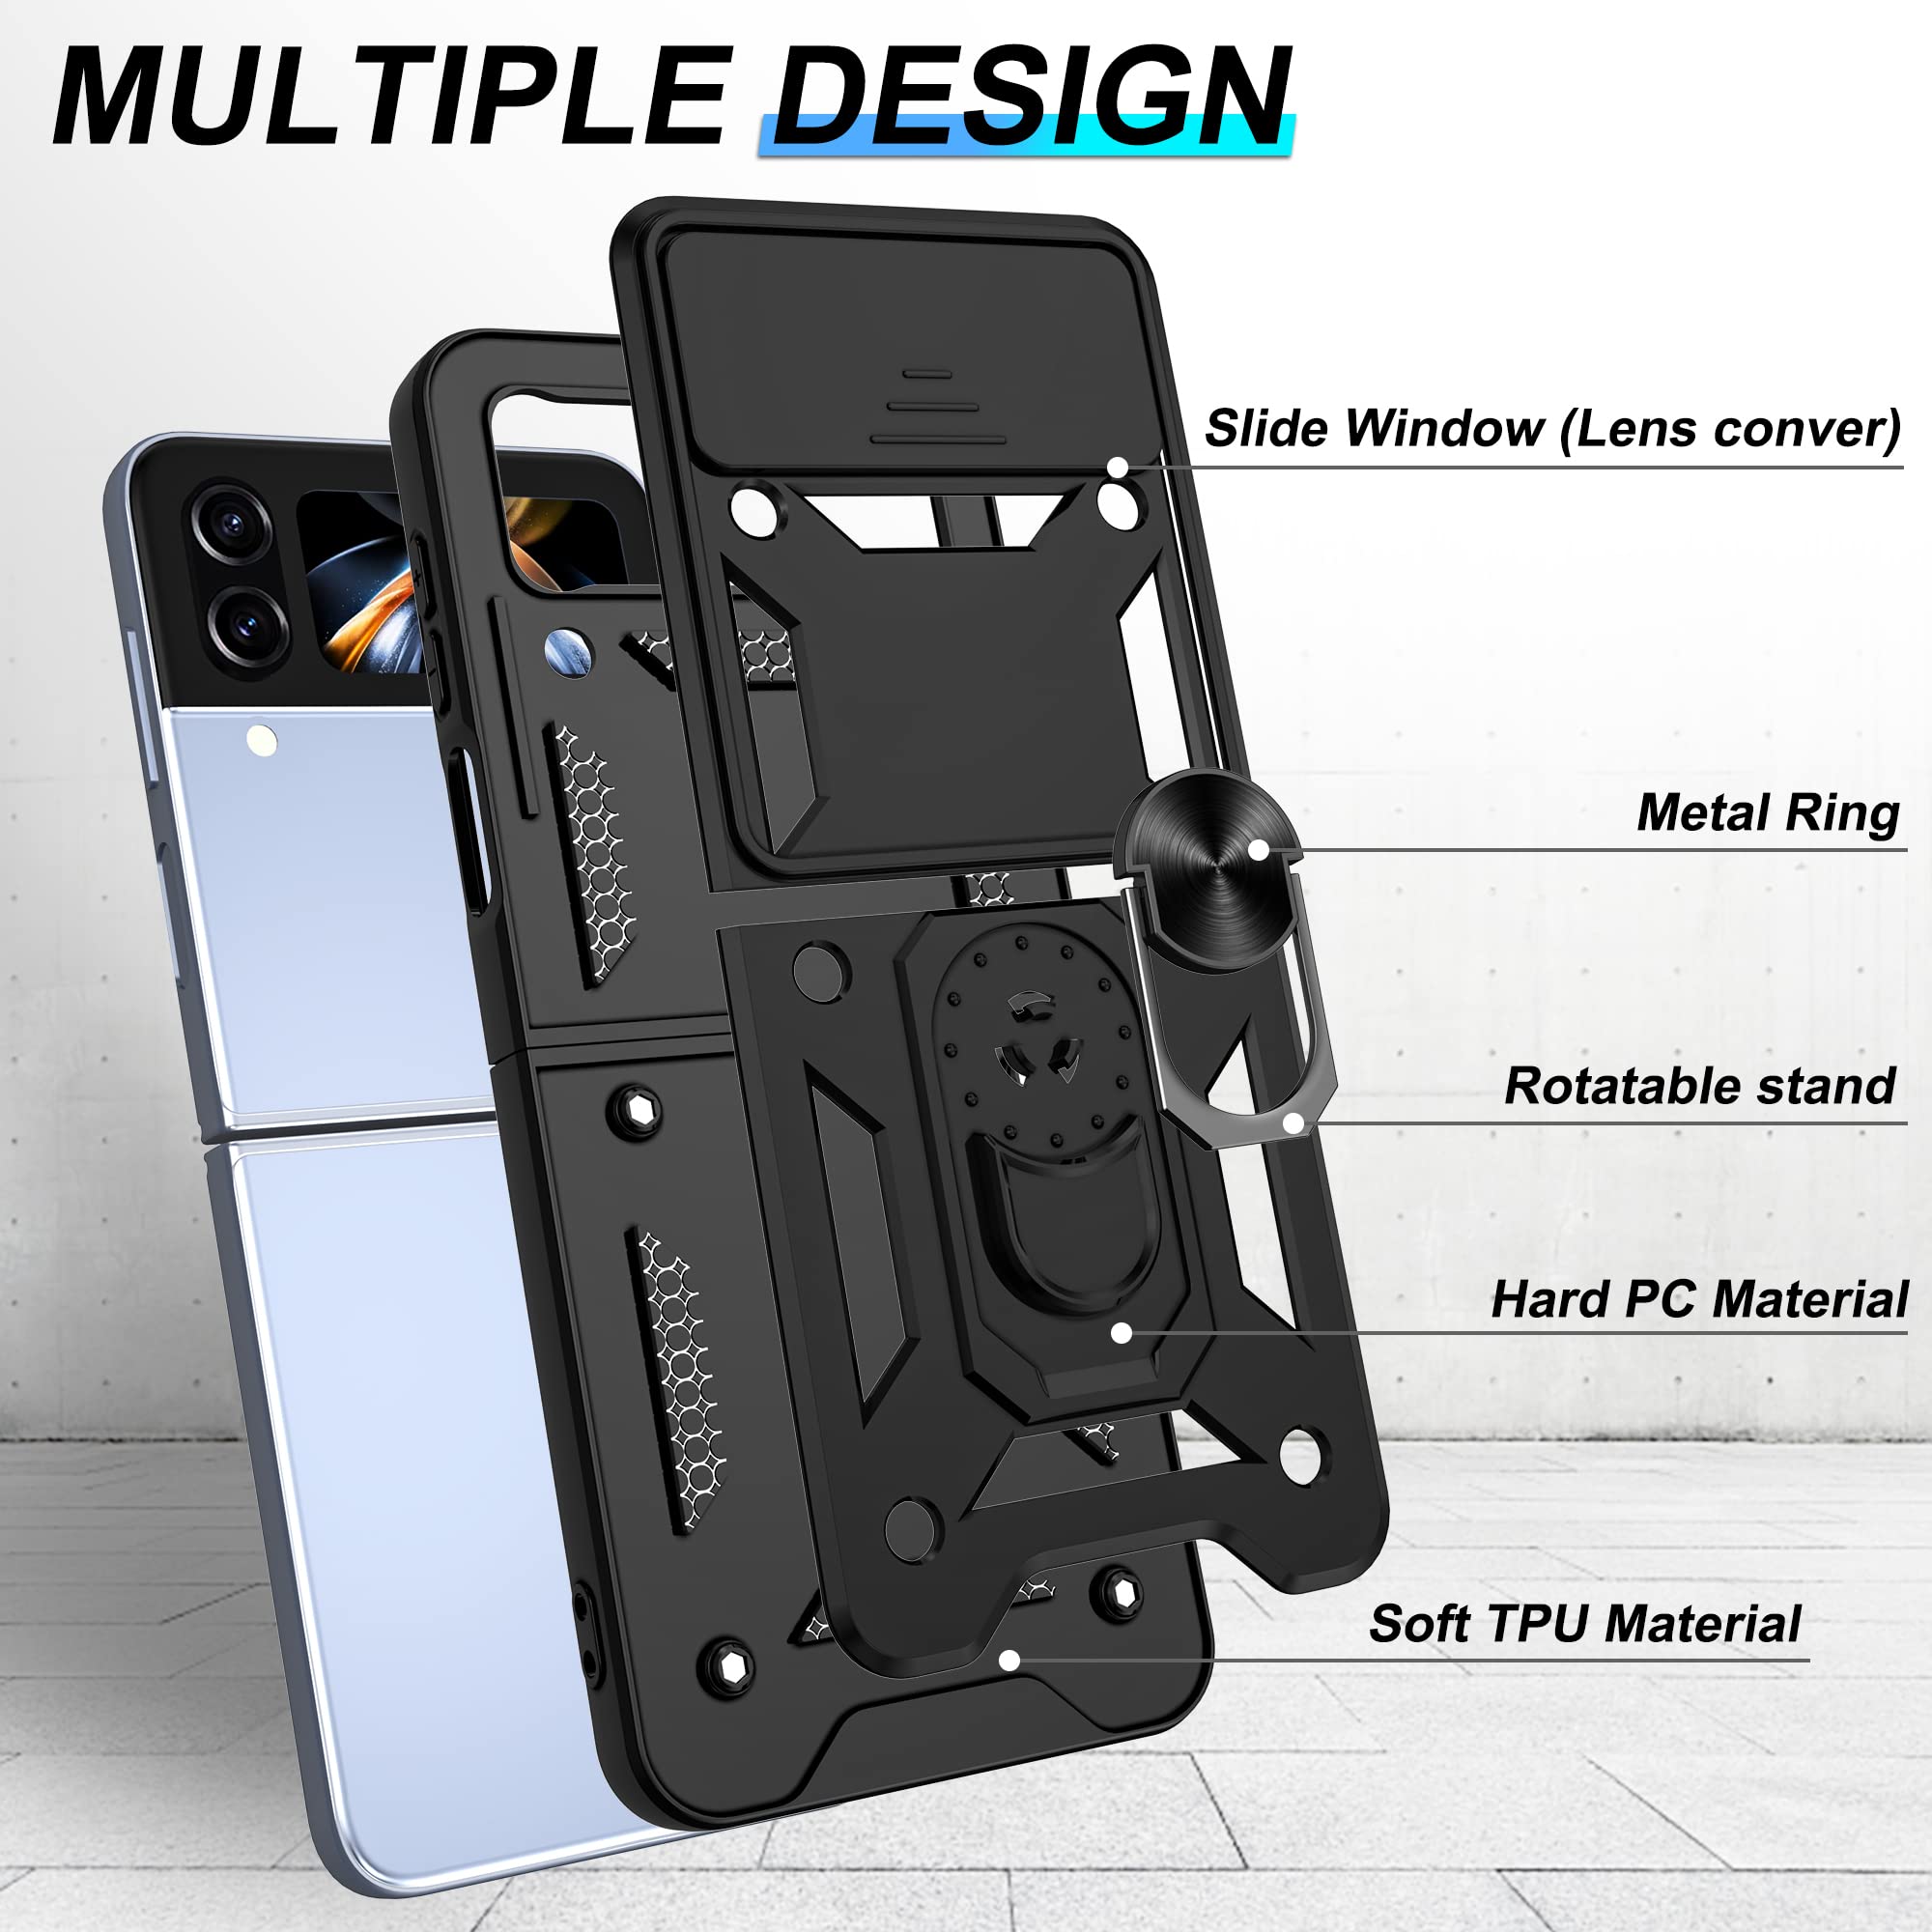 ATUMP for Samsung Galaxy Z Flip 4 Case with Slide Camera Cover, 360°Rotation Ring Kickstand [Military Grade] Case for Samsung Galaxy Z Flip 4,Black